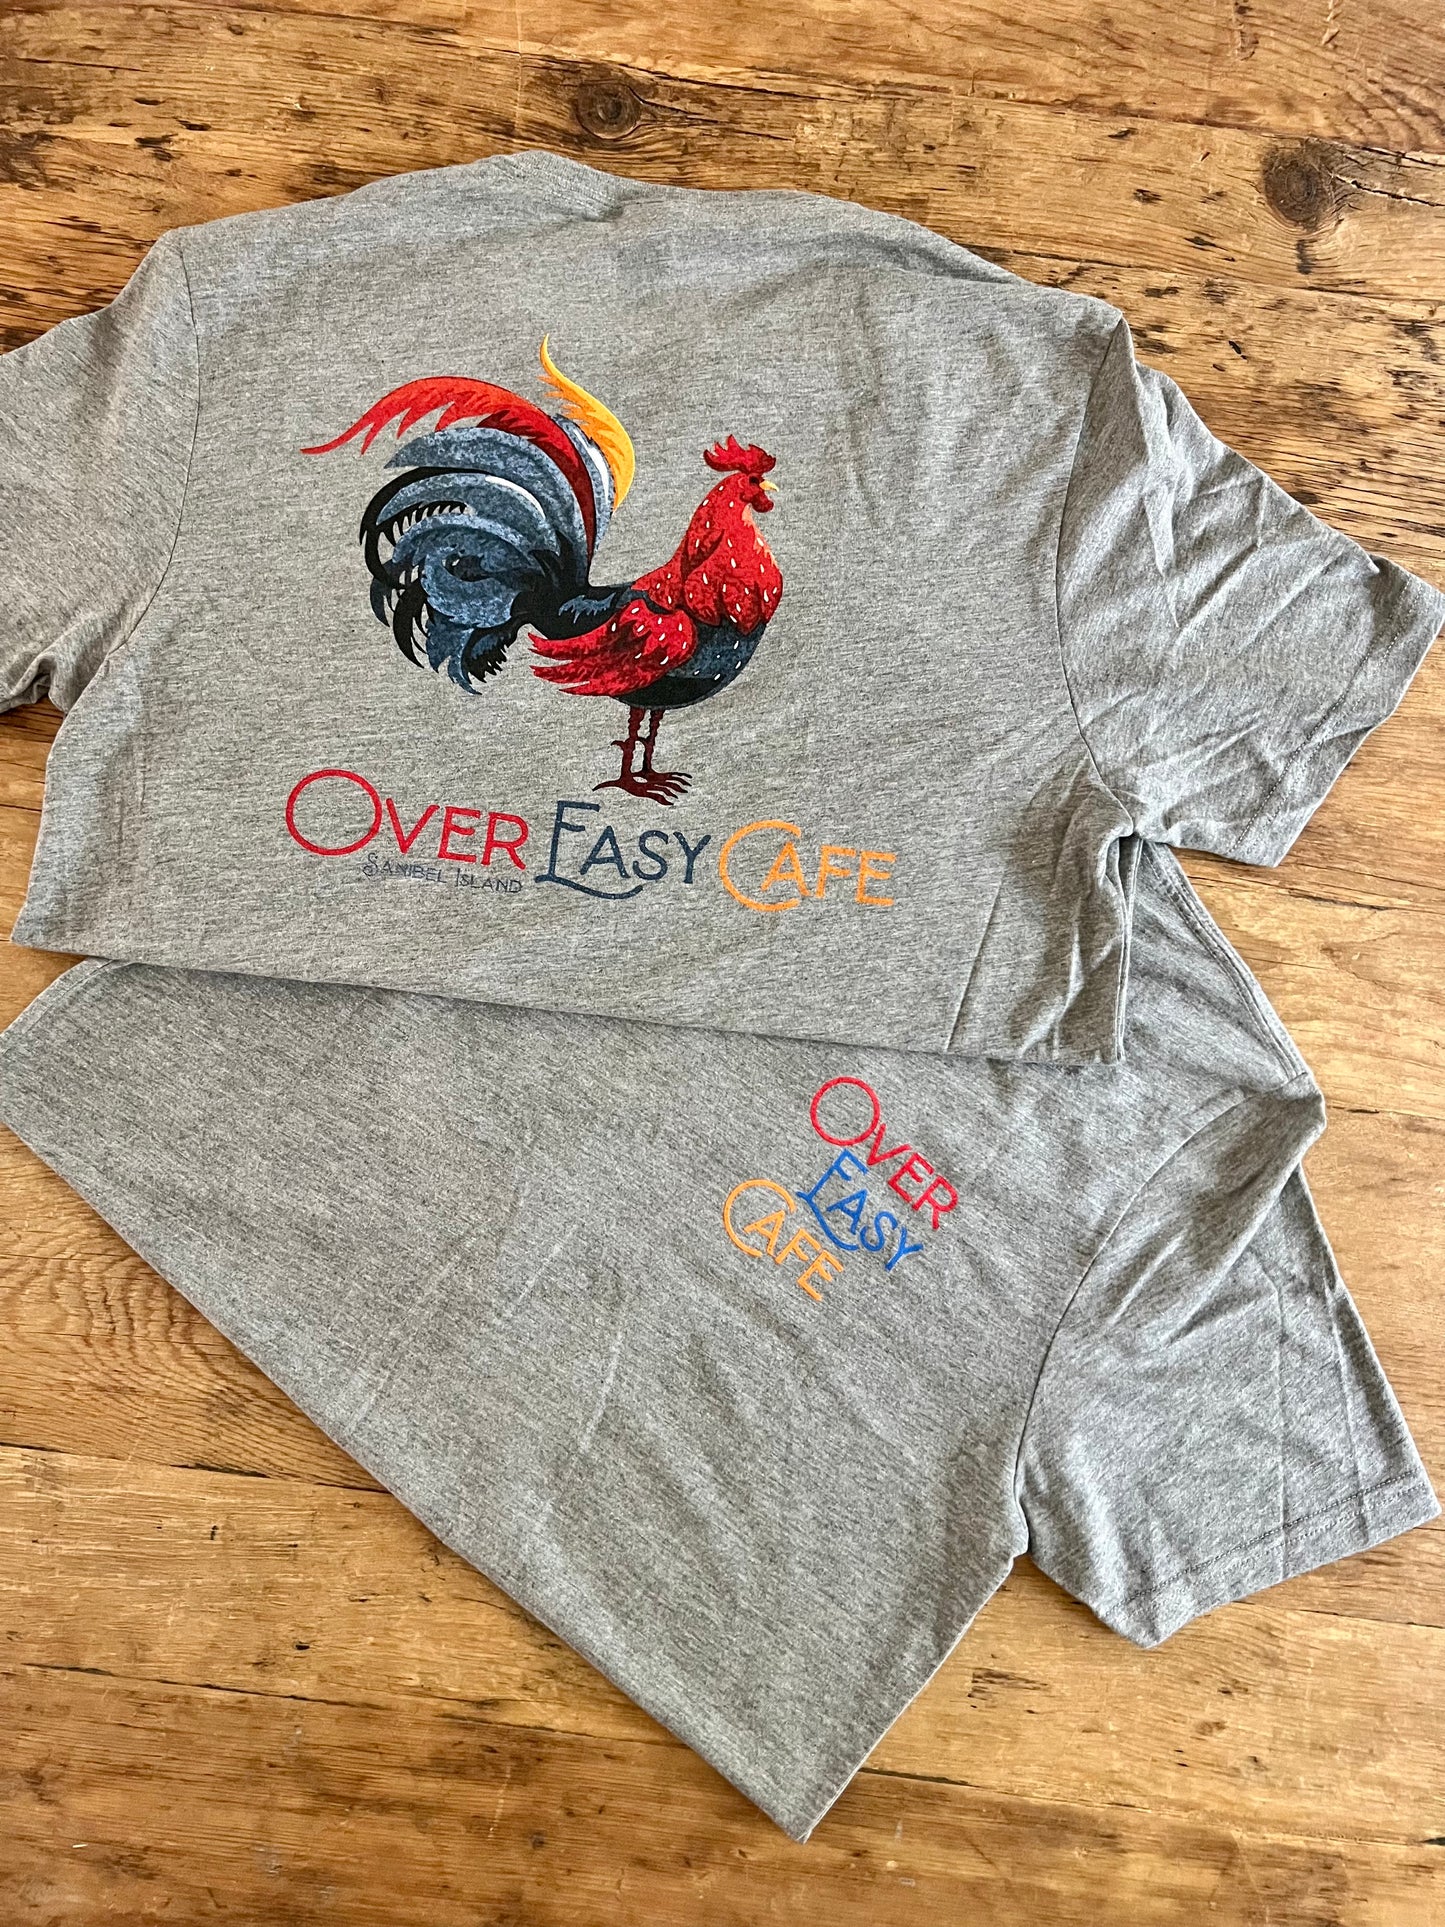 Over Easy Cafe Classic Rooster T-shirt